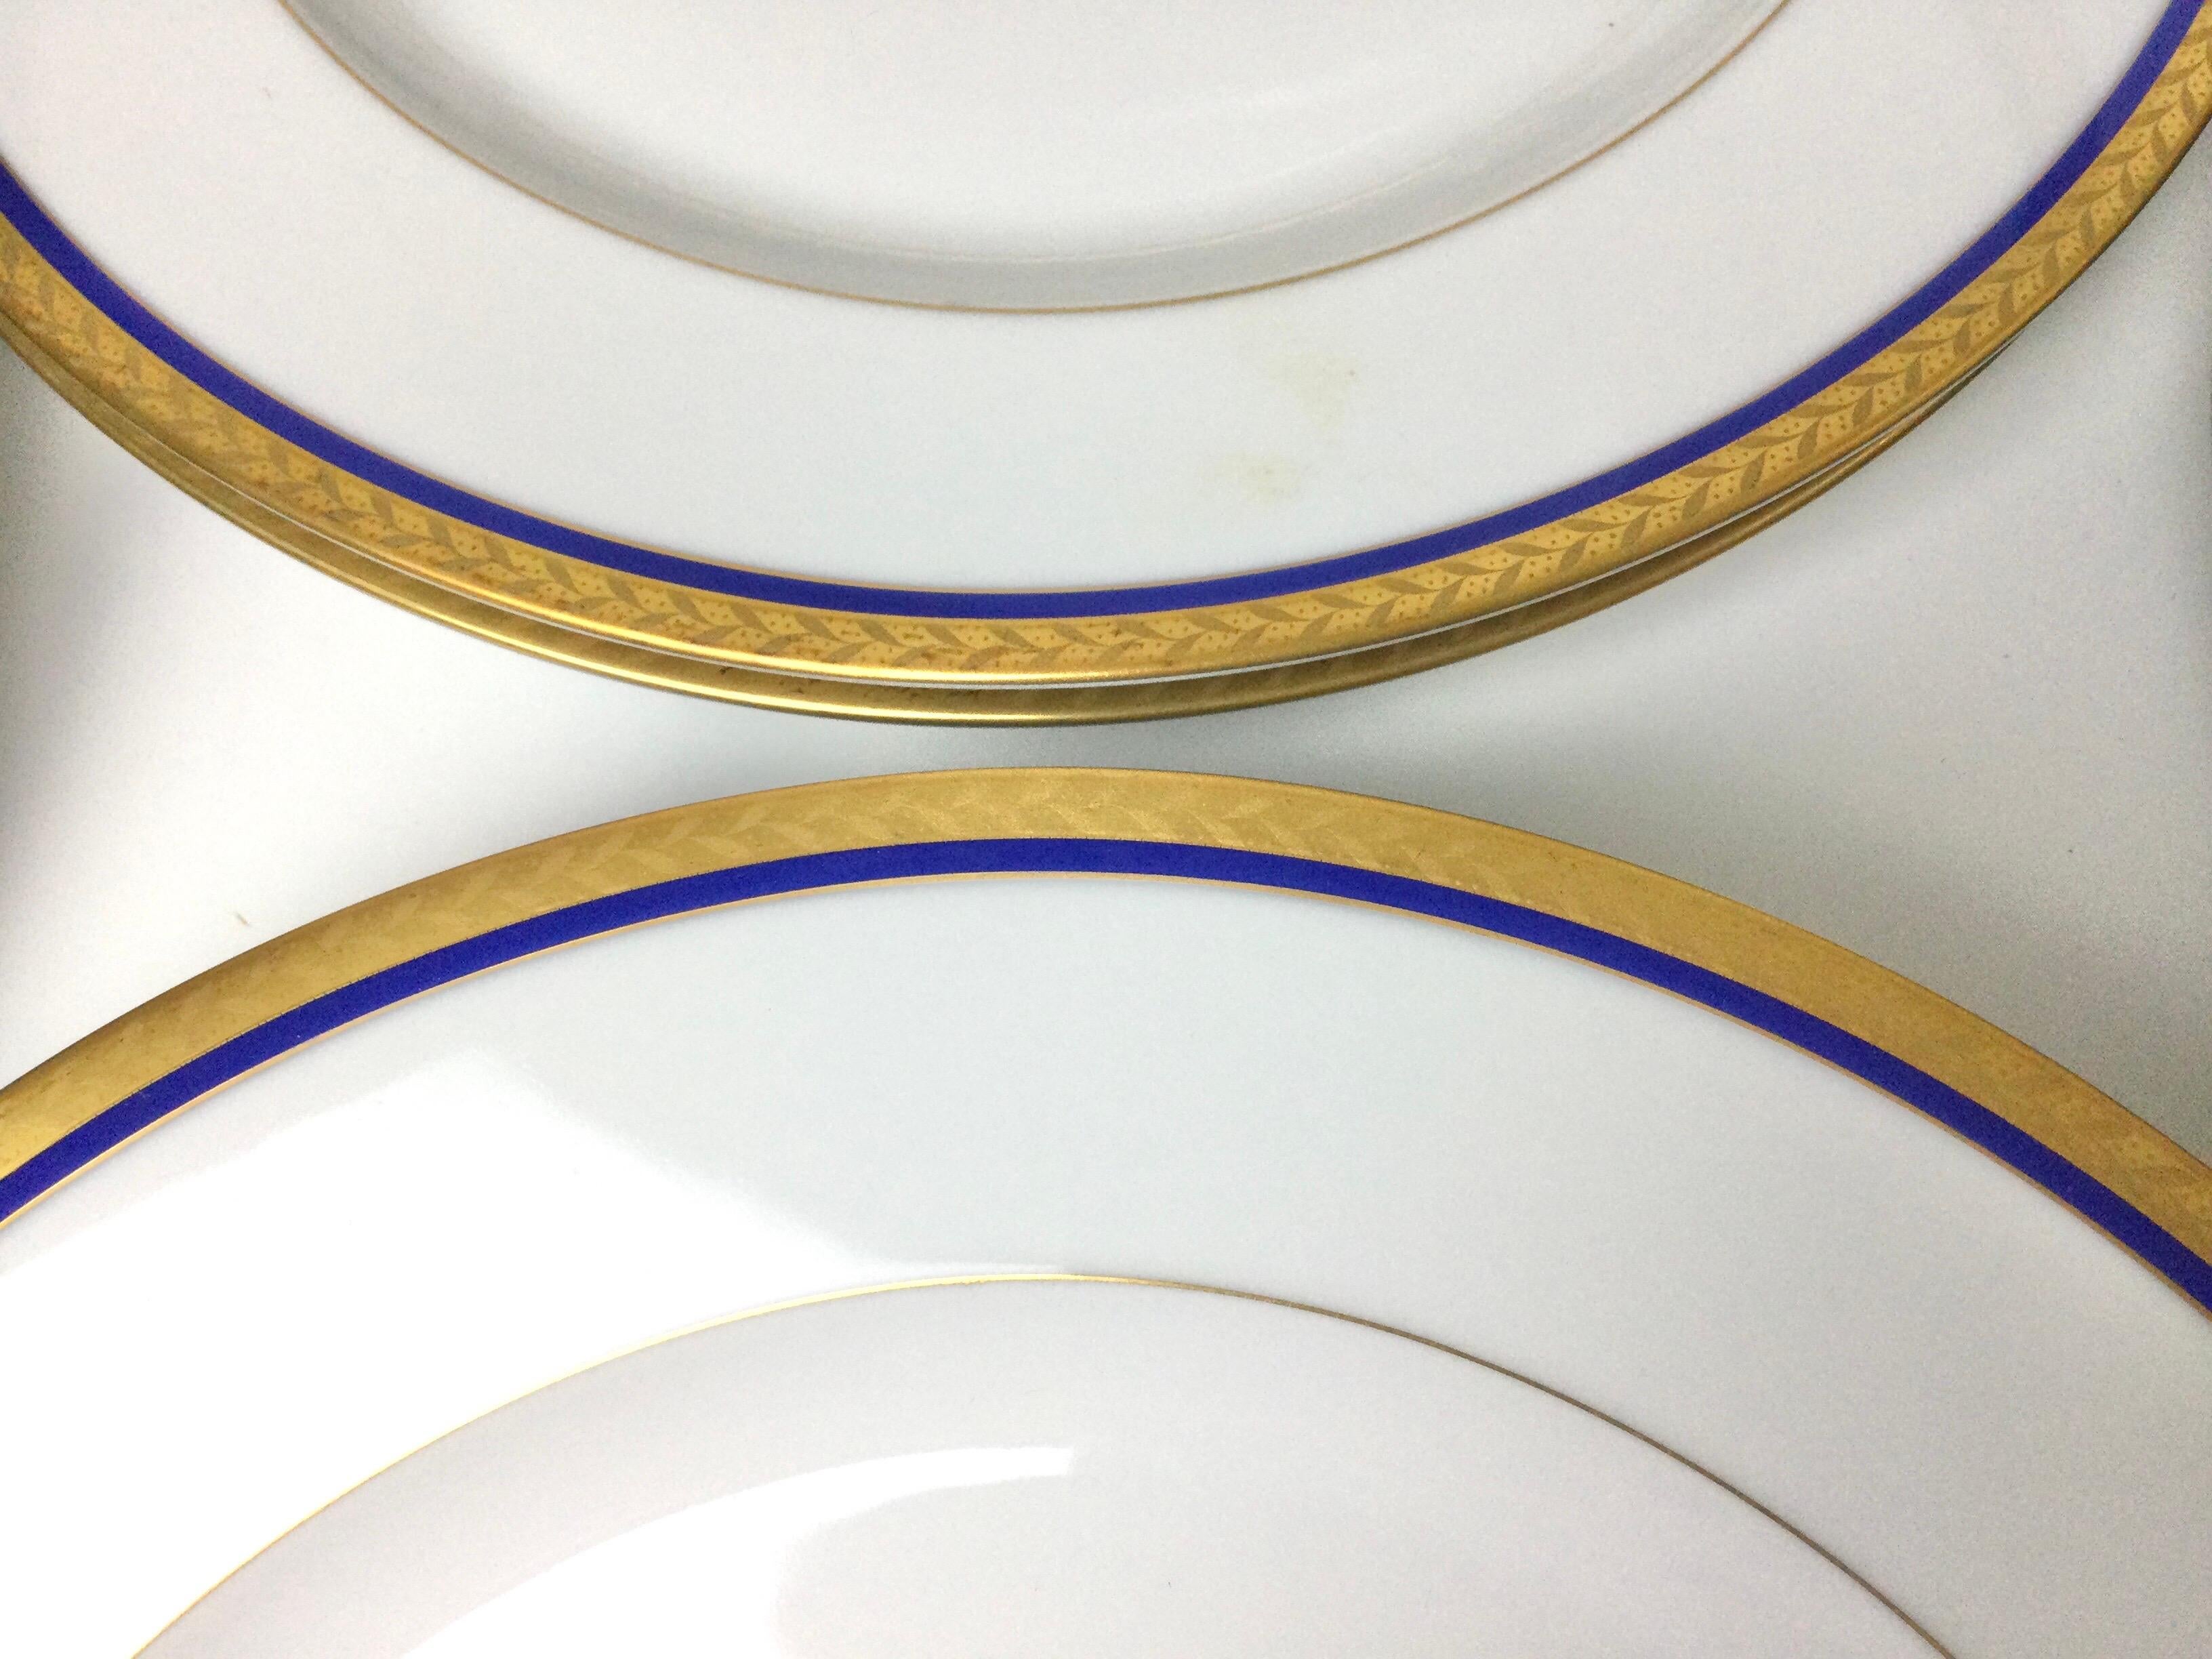 Porcelain Set of 12 Royal Bayreuth China Dinner Plates White with Cobalt and Gilt Borders